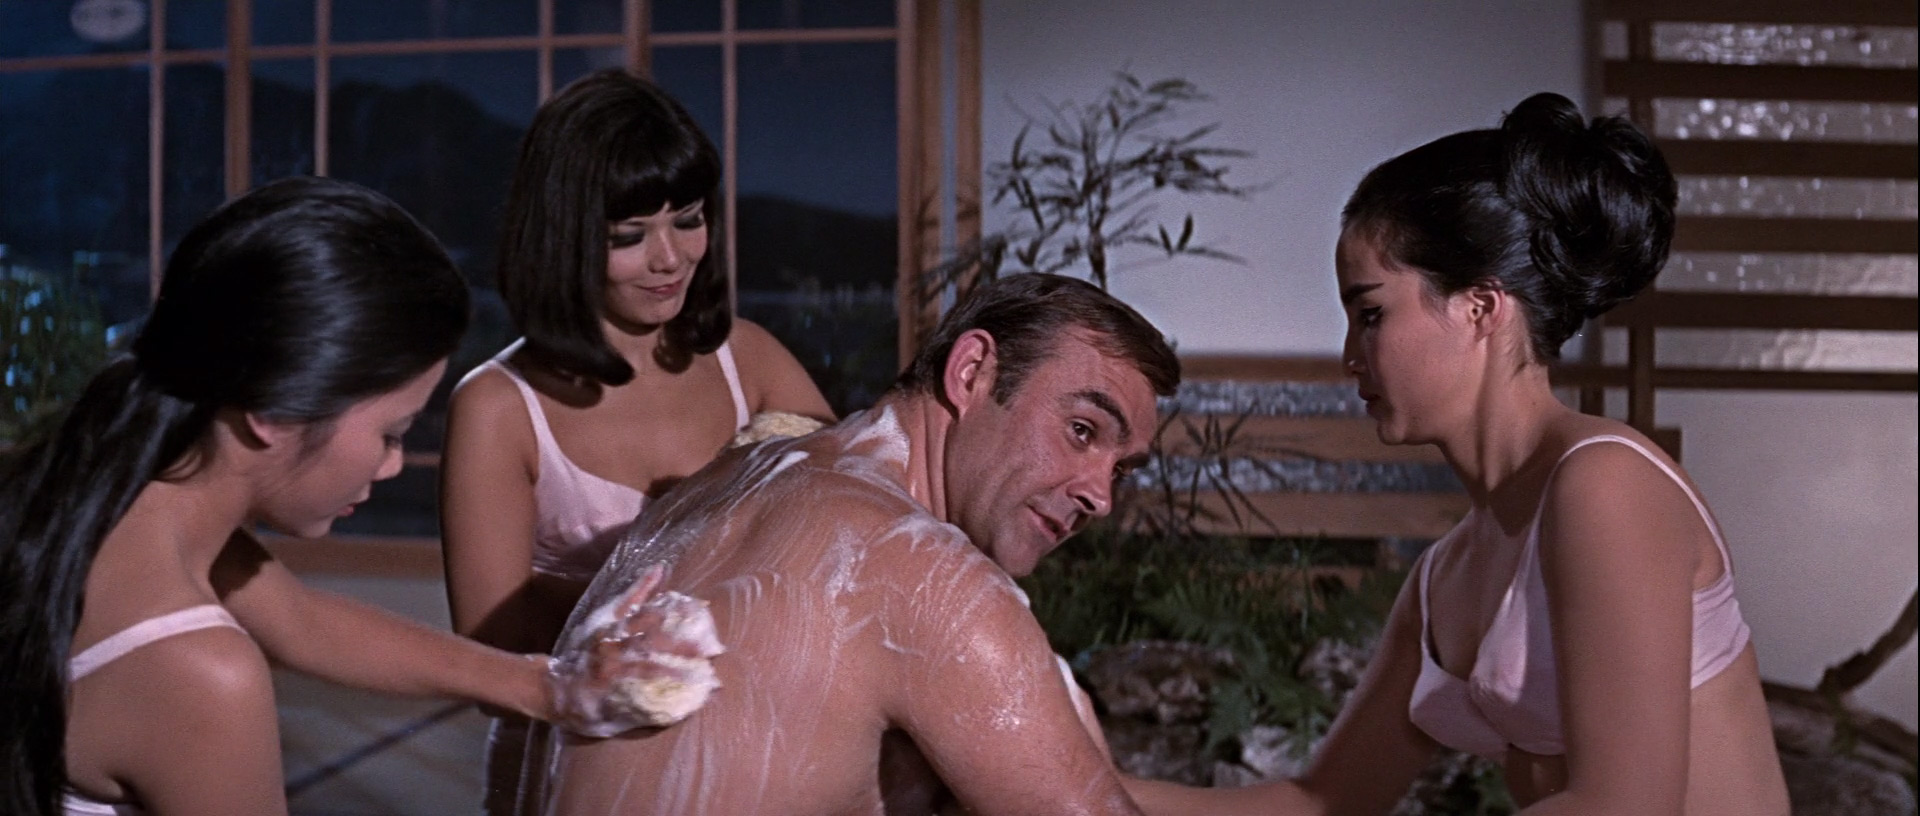 James Bond, Sean Connery in You Only Live Twice